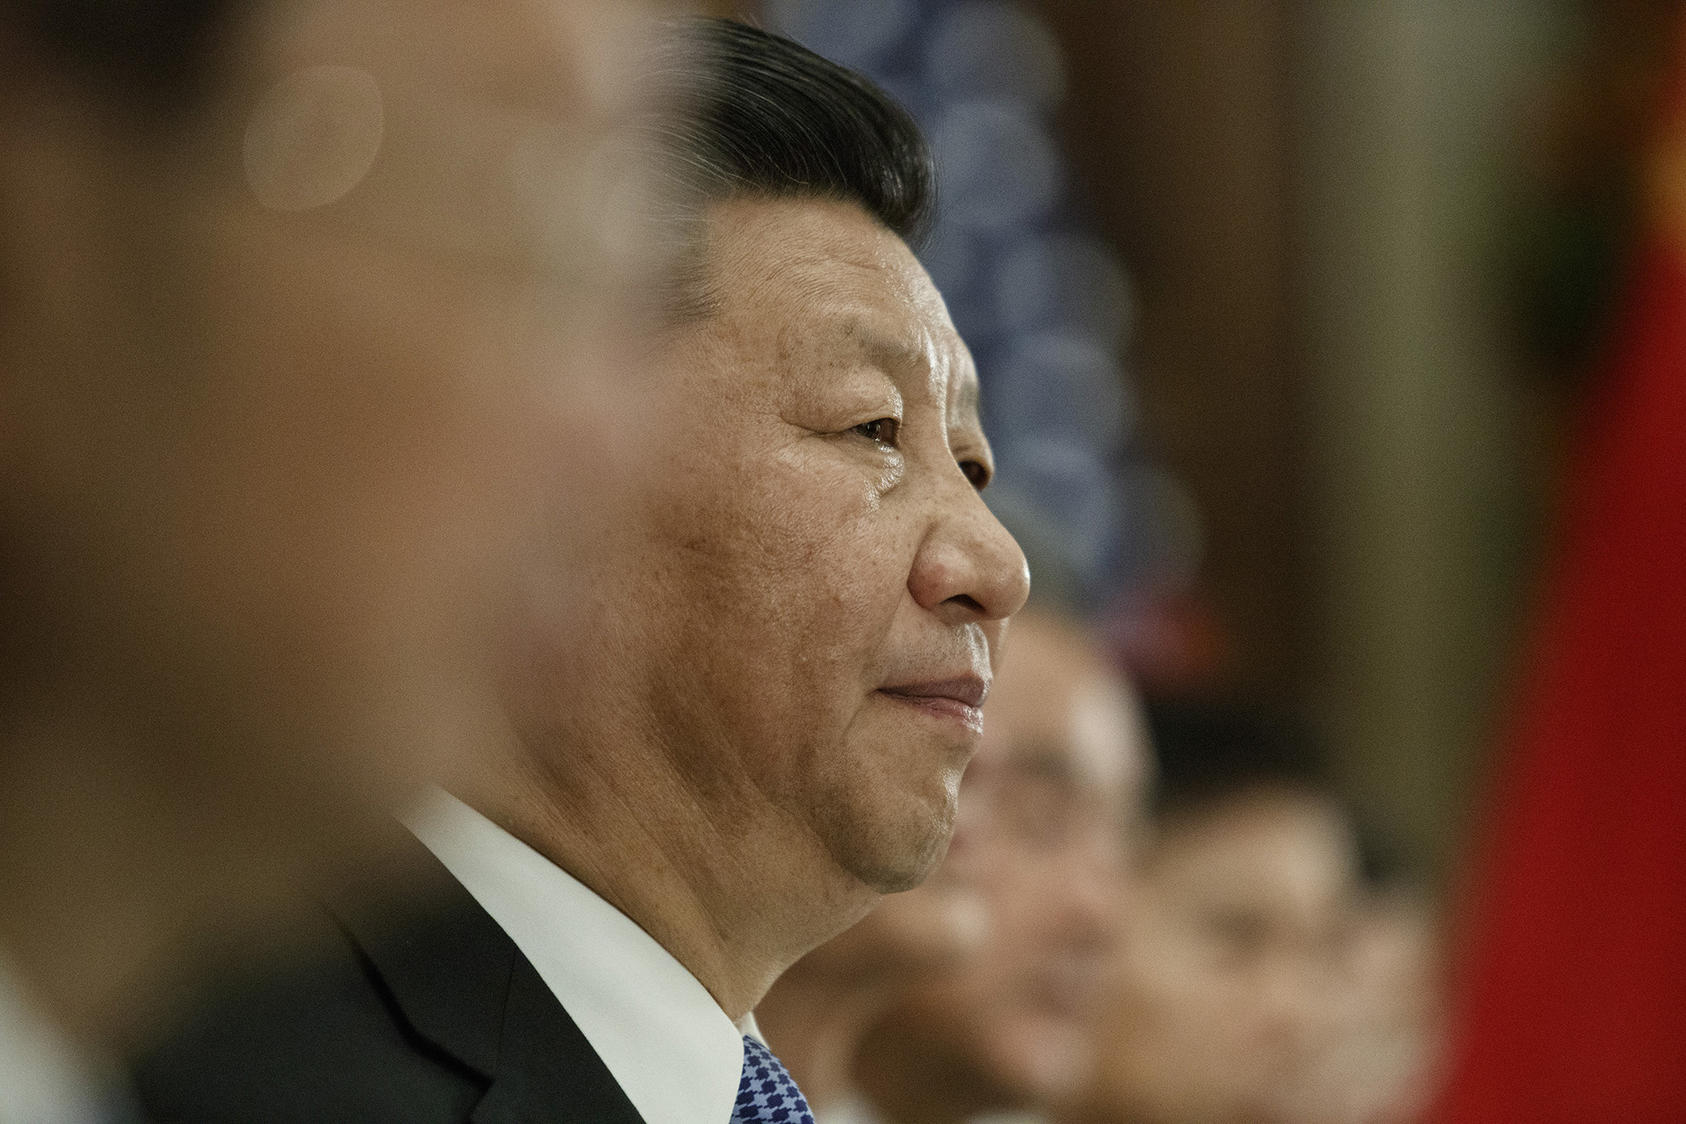 Chinese President Xi Jinping during the G-20 Summit in Buenos Aires on December 1, 2018. (Photo by Tom Brenner/New York Times)